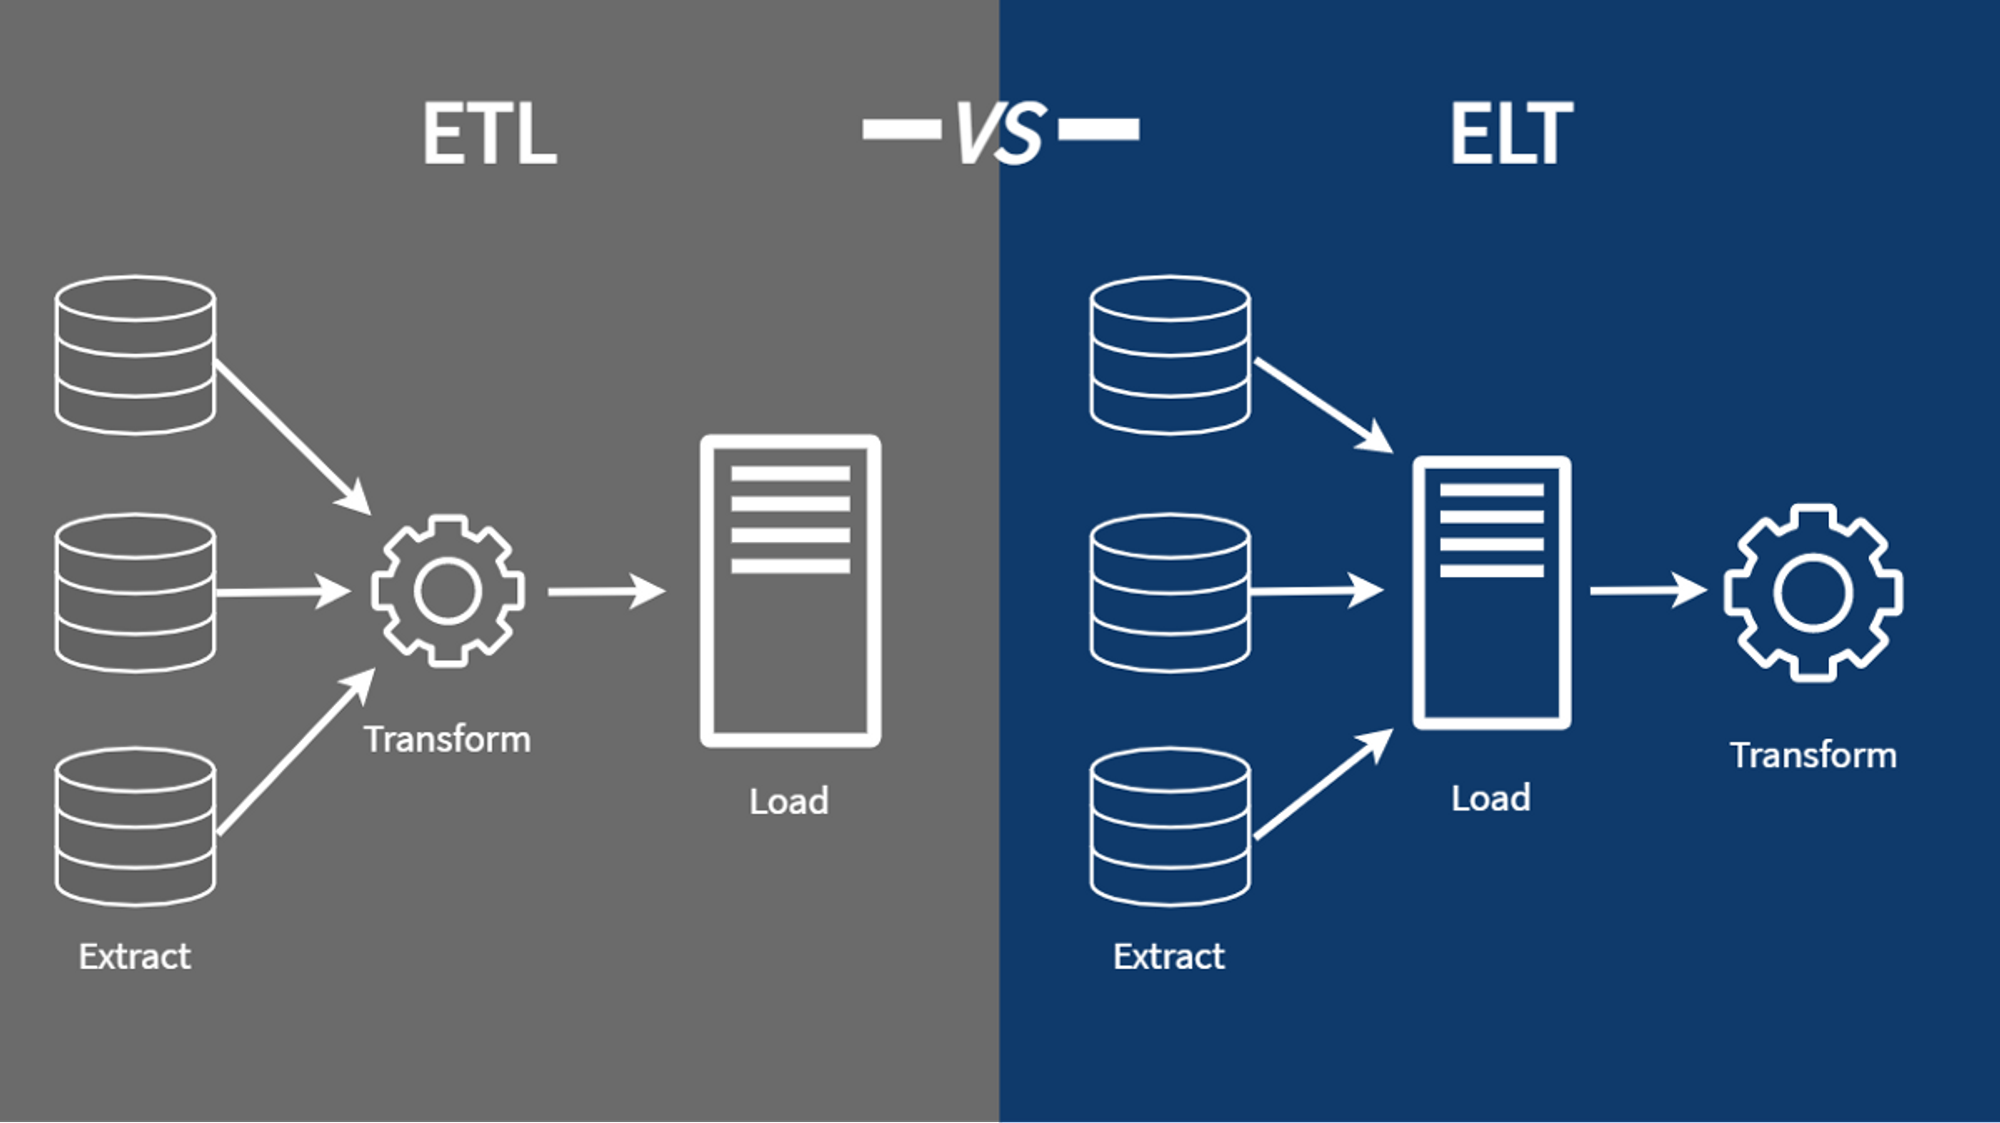 Difference between ETL and ELT. Picture borrowed from Nicholas Leong.